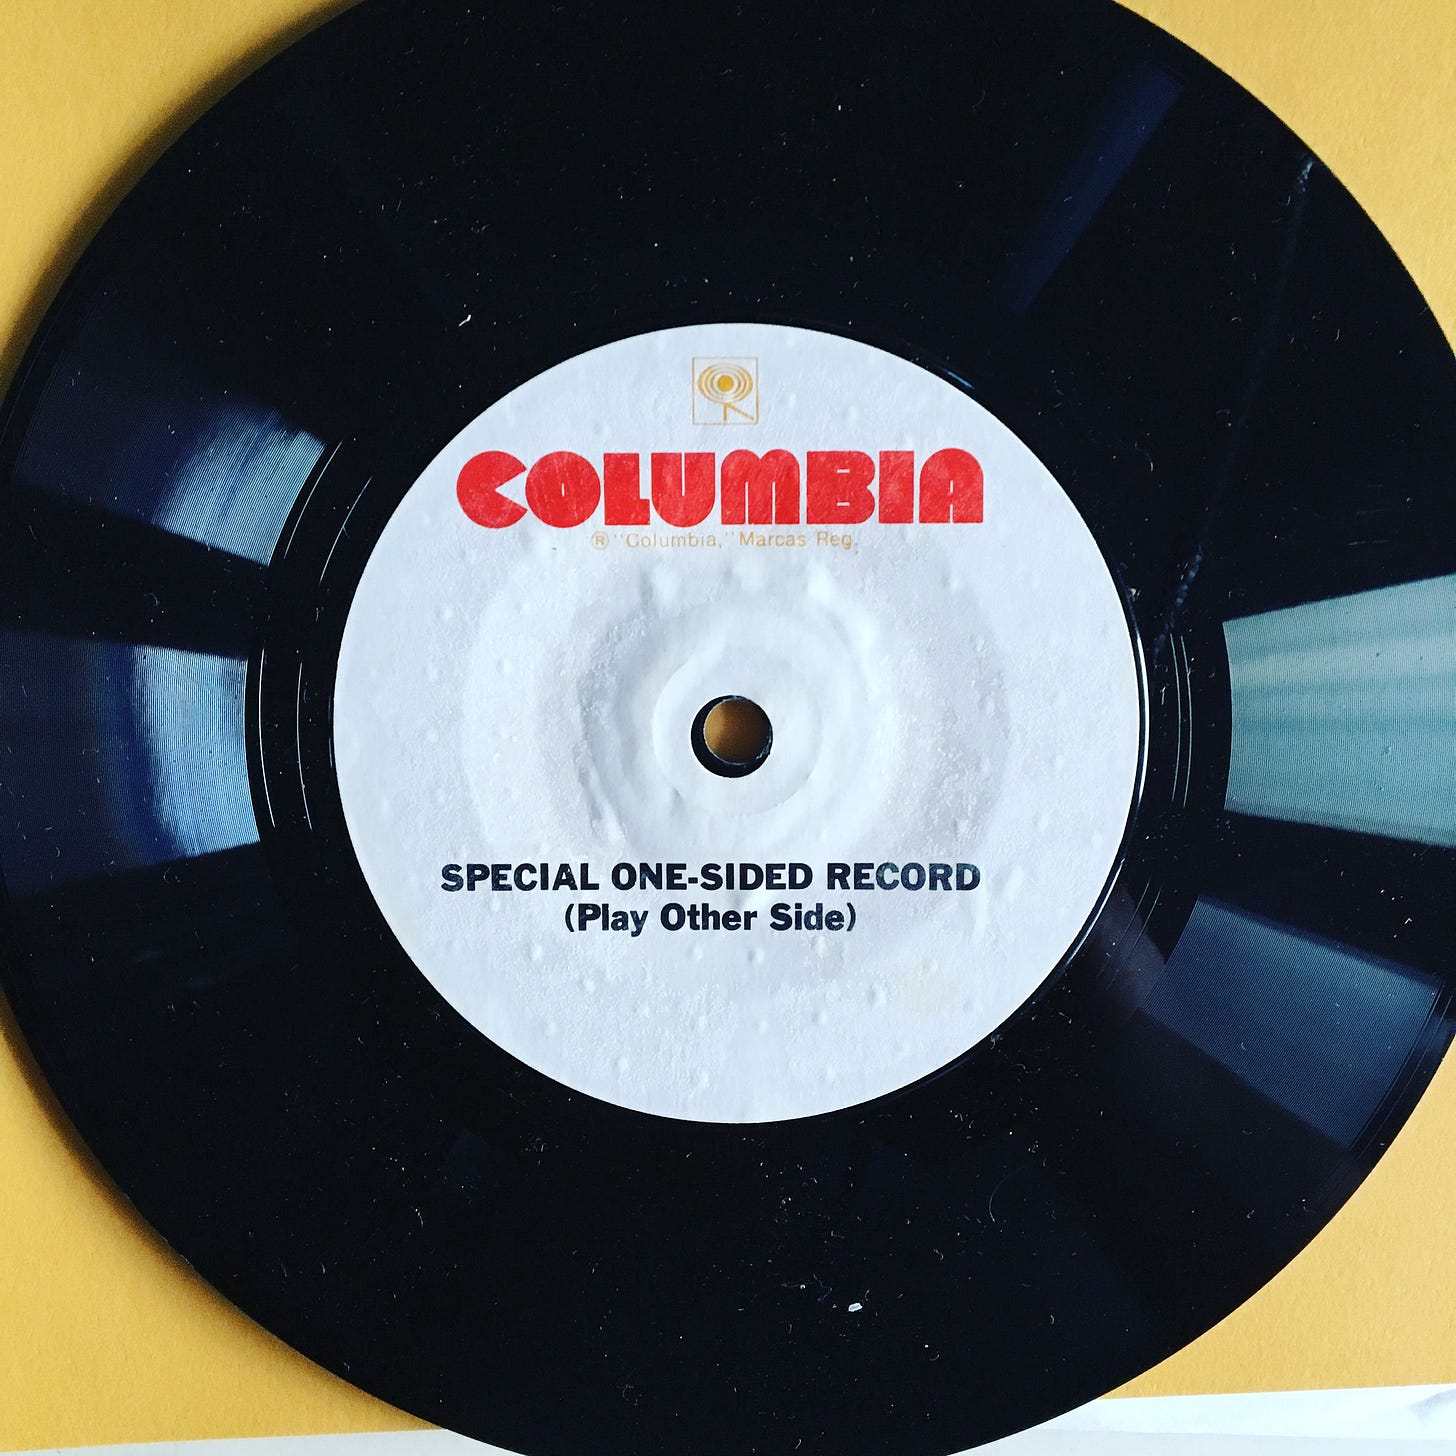 A vinyl record with a label that says "special one-sided record (play other side)"